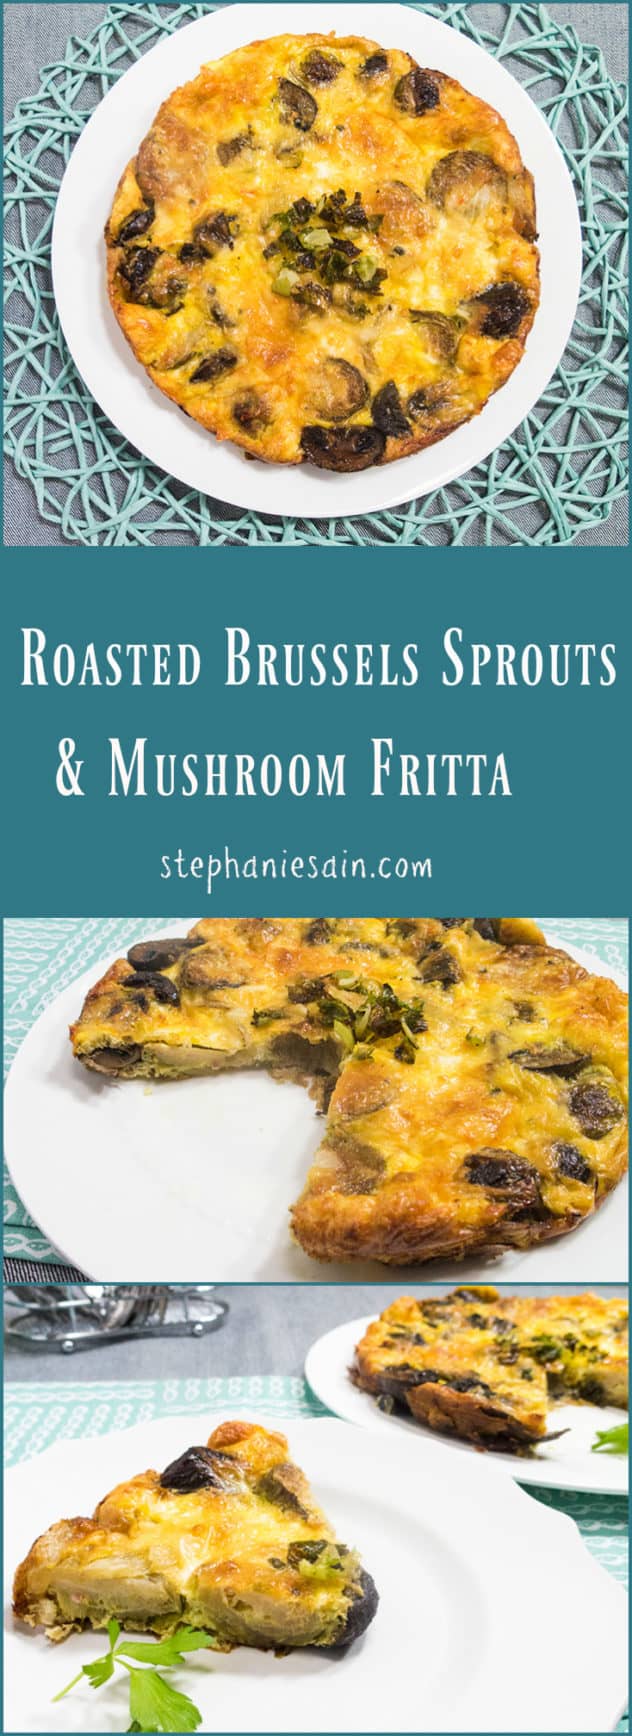 Roasted Brussels Sprouts and Mushroom Fritta is loaded with fresh roasted veggies and is the perfect make ahead brunch or dinner. Vegetarian and Gluten Free.